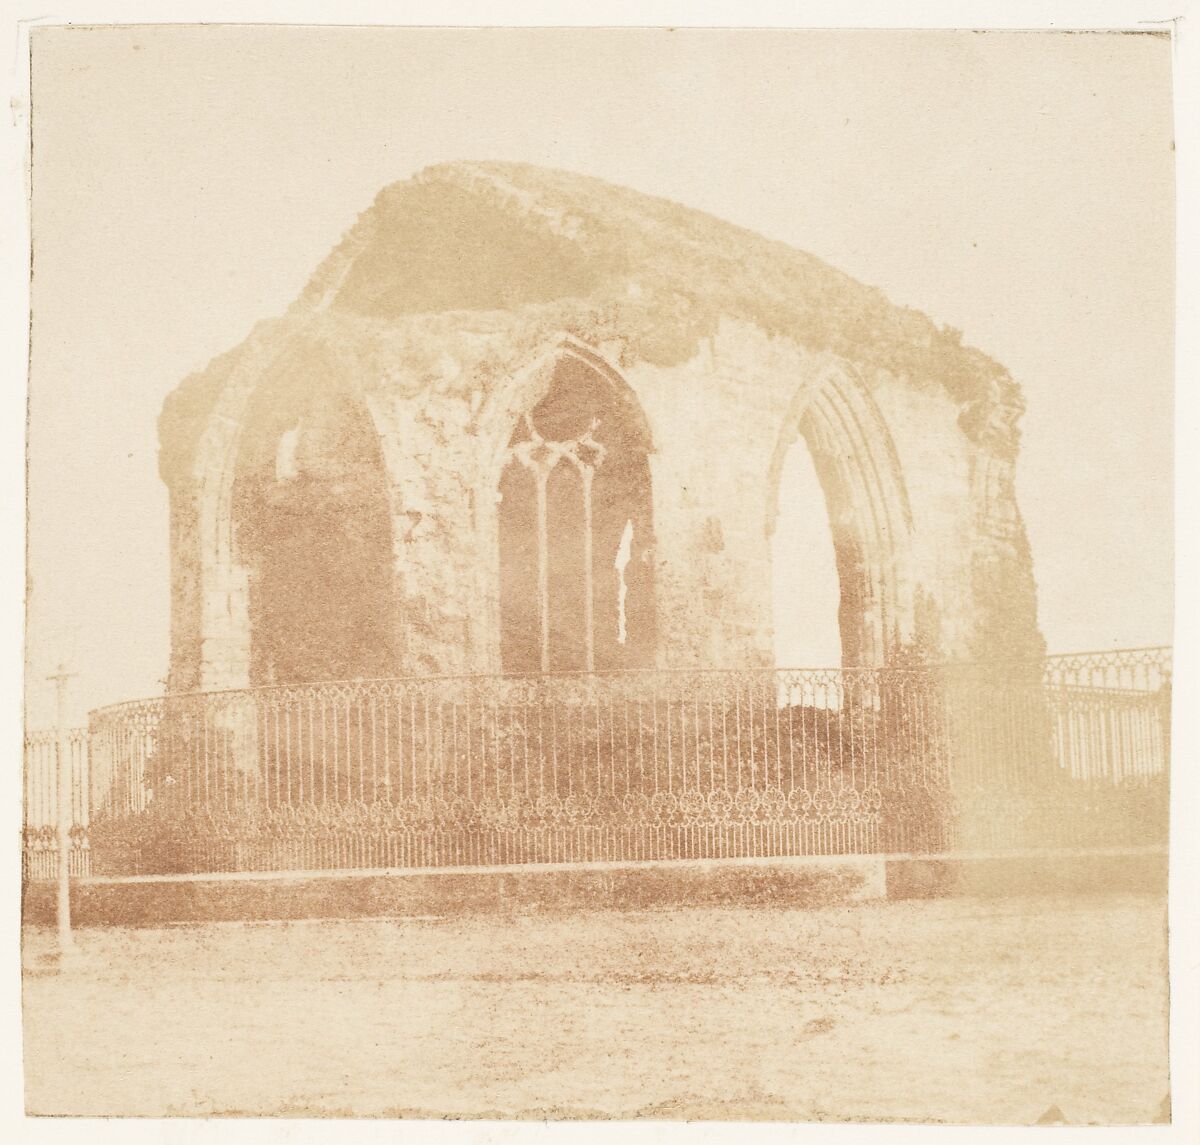 St. Andrews. Blackfriars' Chapel, Hill and Adamson (British, active 1843–1848), Salted paper print from paper negative 